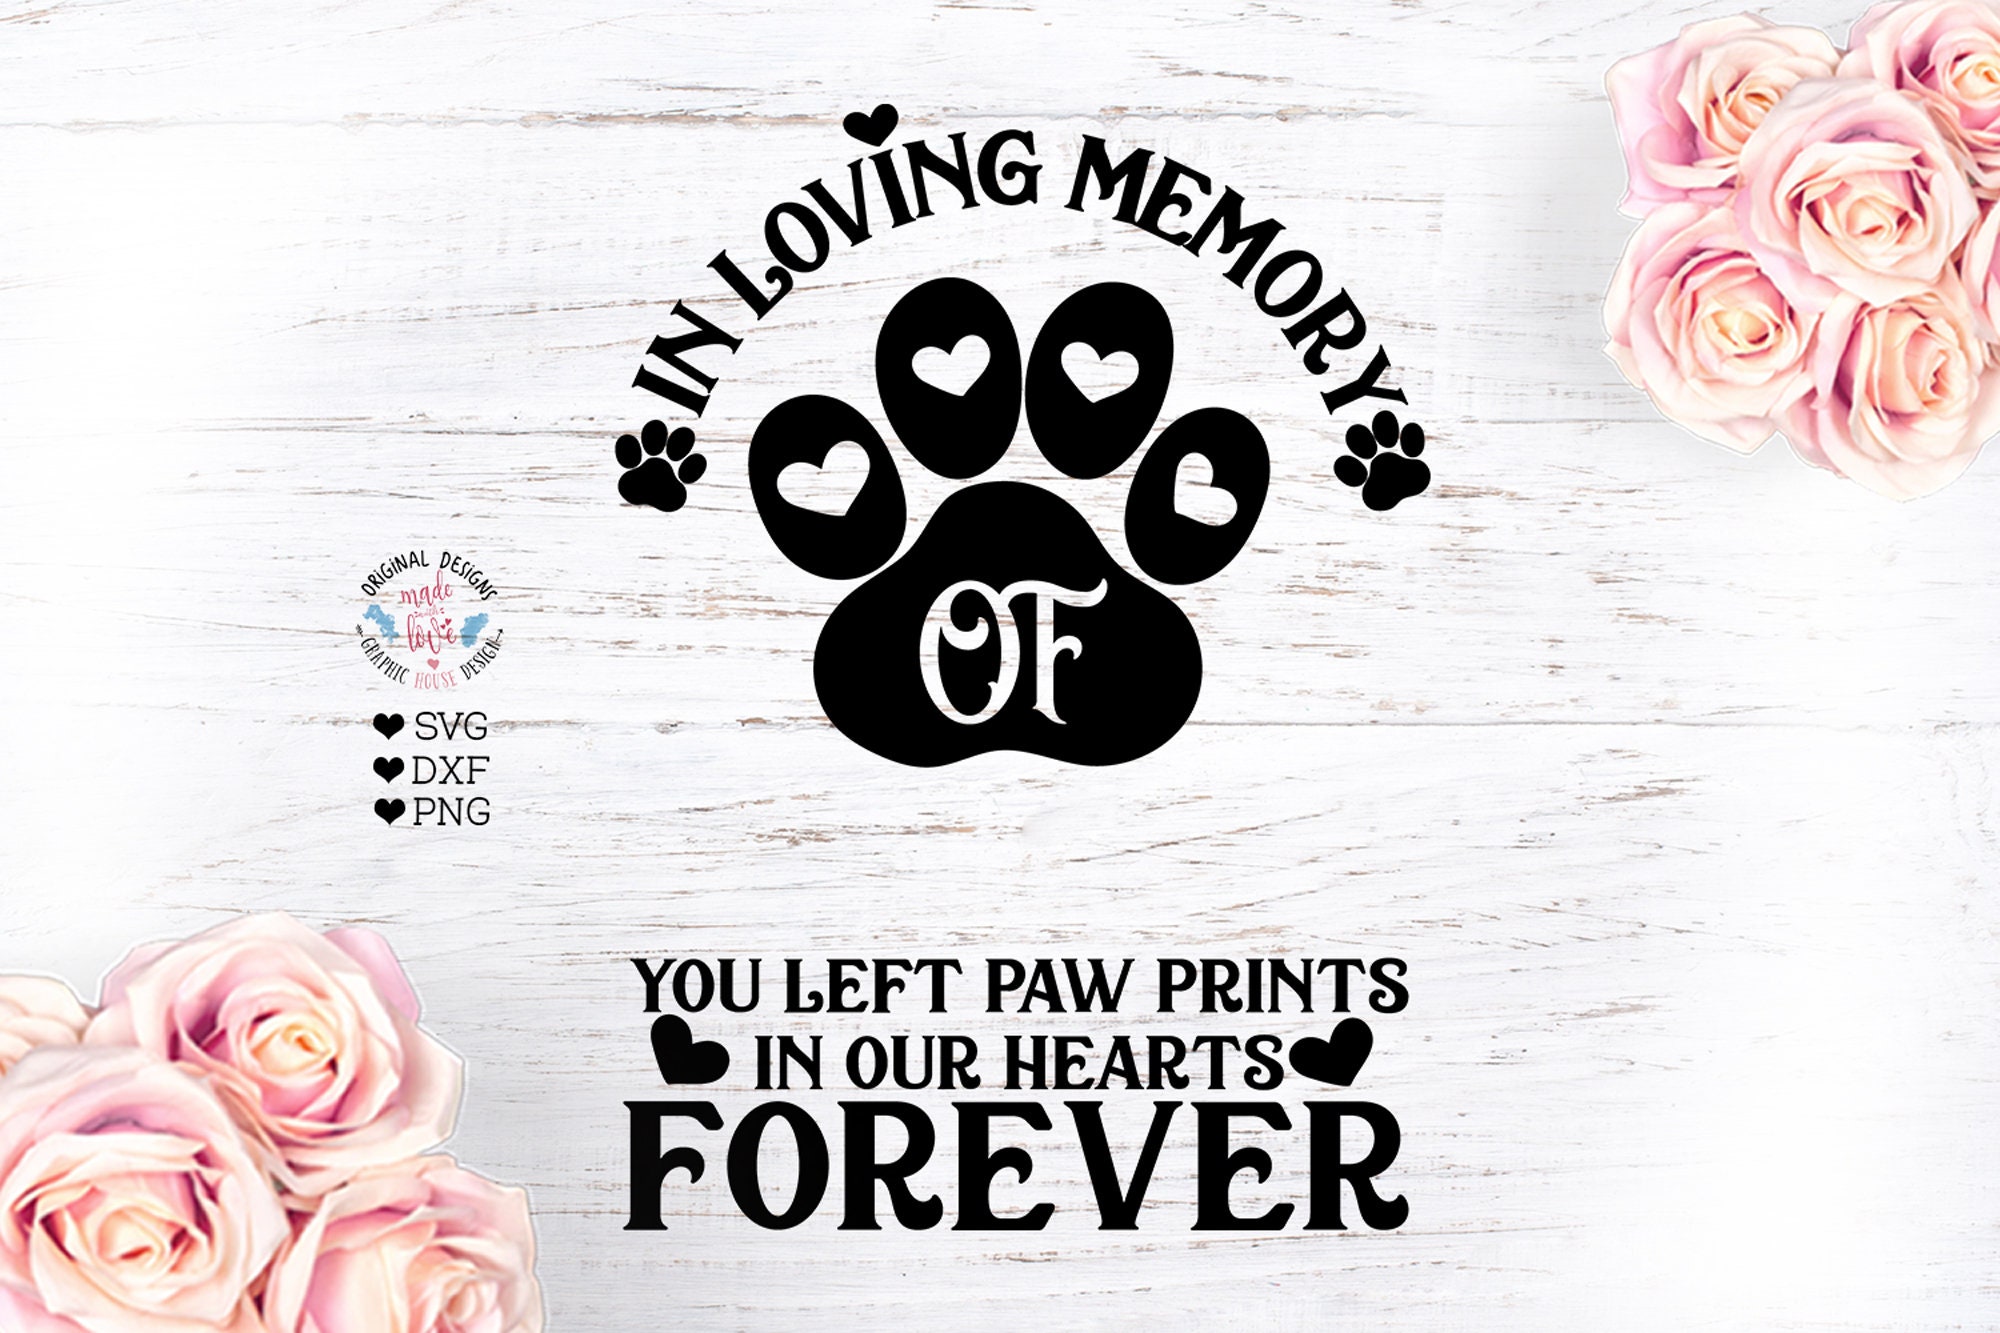 in Loving Memory Gone but Not Forgotten You Left Paw Prints on My Heart ENBOVE Funeral Cremation Urns for Dogs Cats